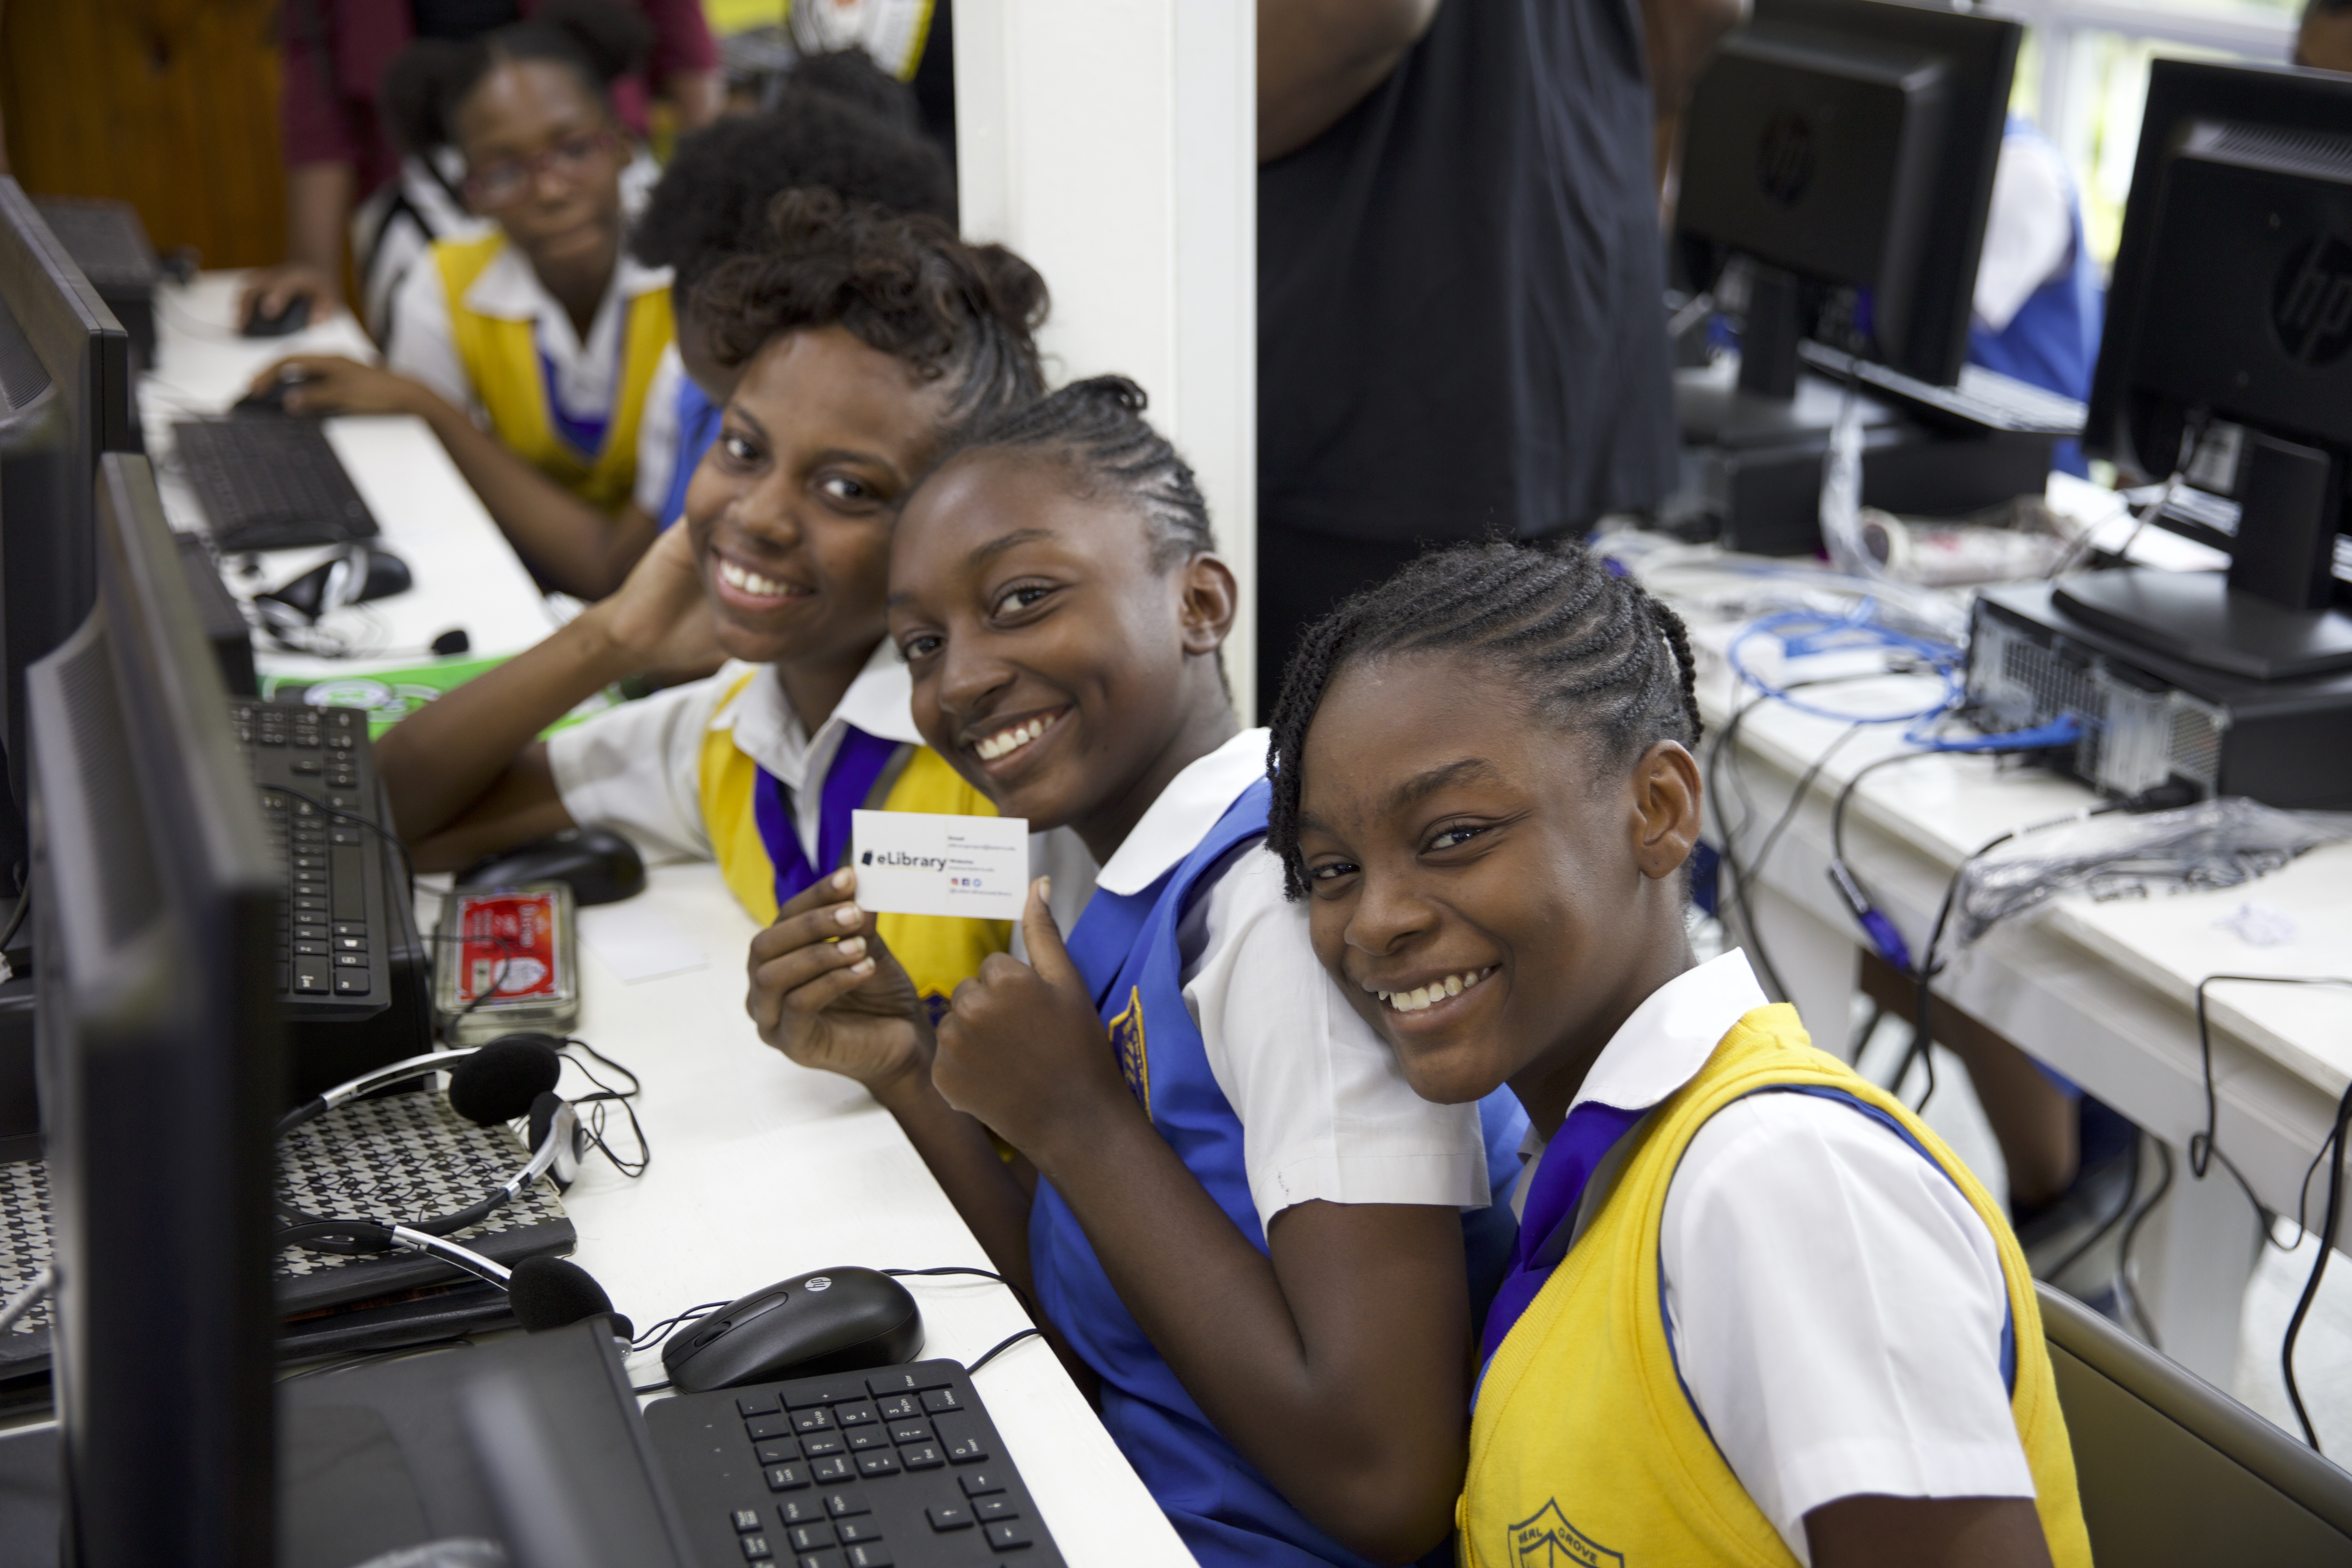 Students in Jamaica pose for a photo while receiving instruction from members of the La Sierra University Enactus team on how to use the revolutionary flash drive-based eLibrary system. (Photos courtesy of La Sierra University Enactus)